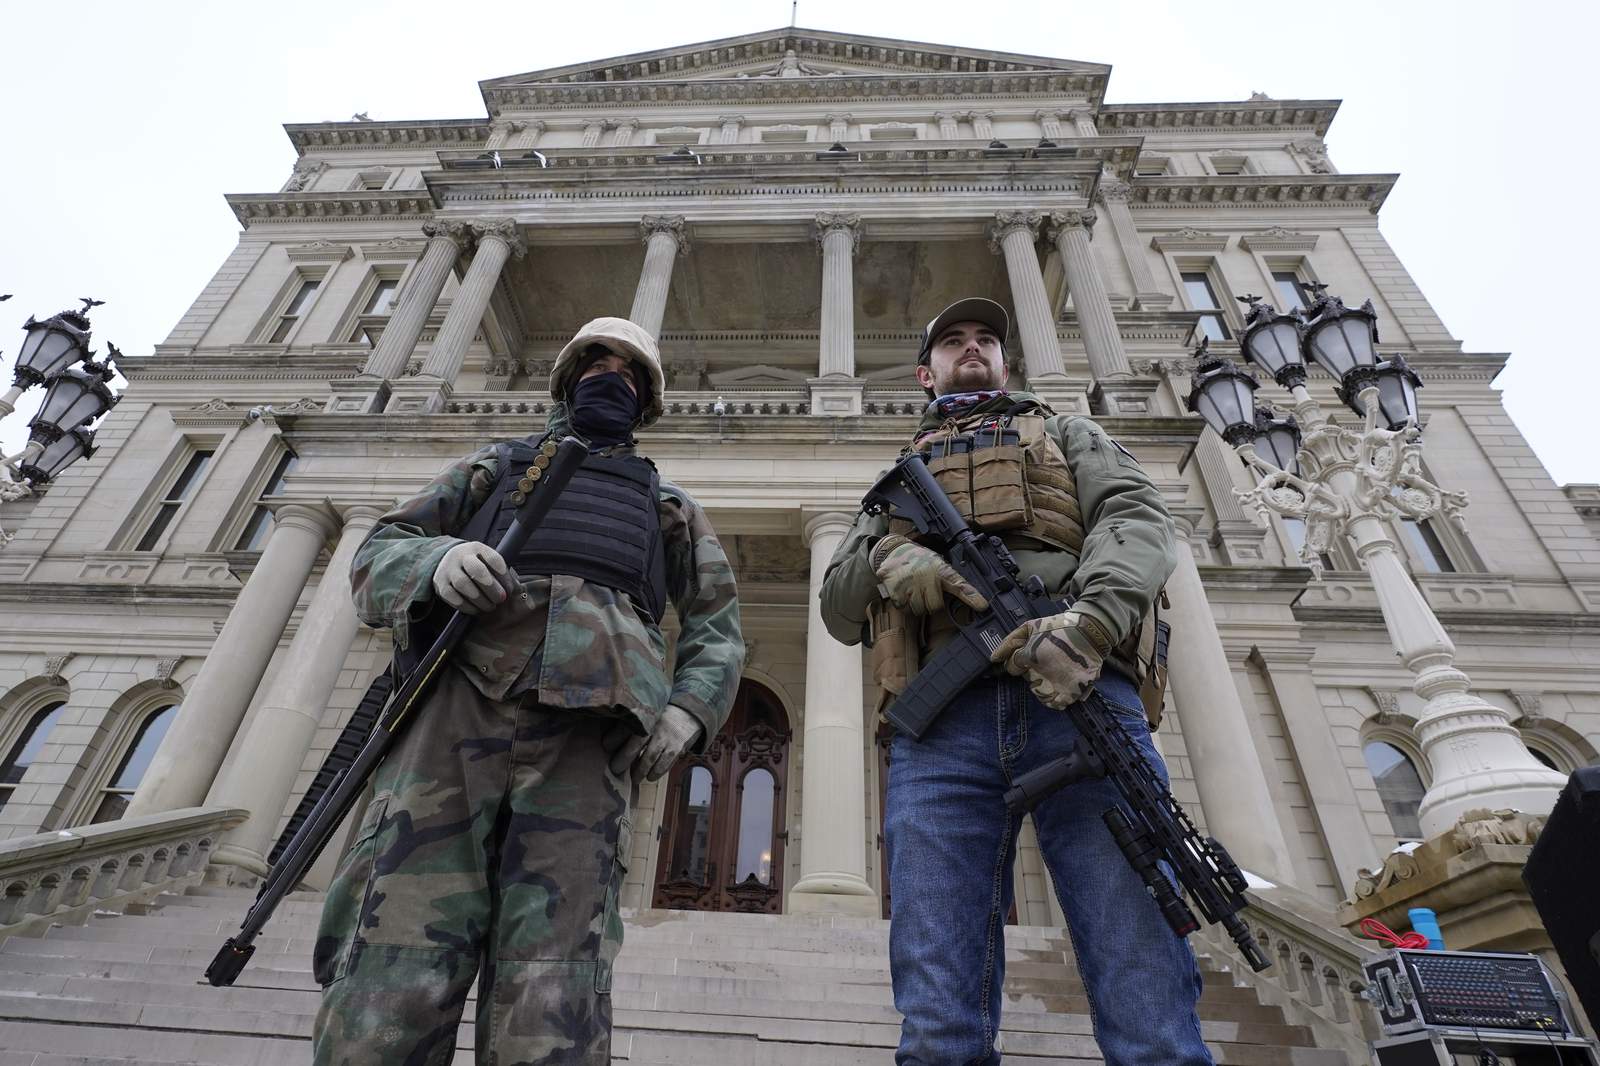 Michigan law enforcement on armed Capitol protests this weekend: ‘We will be prepared’